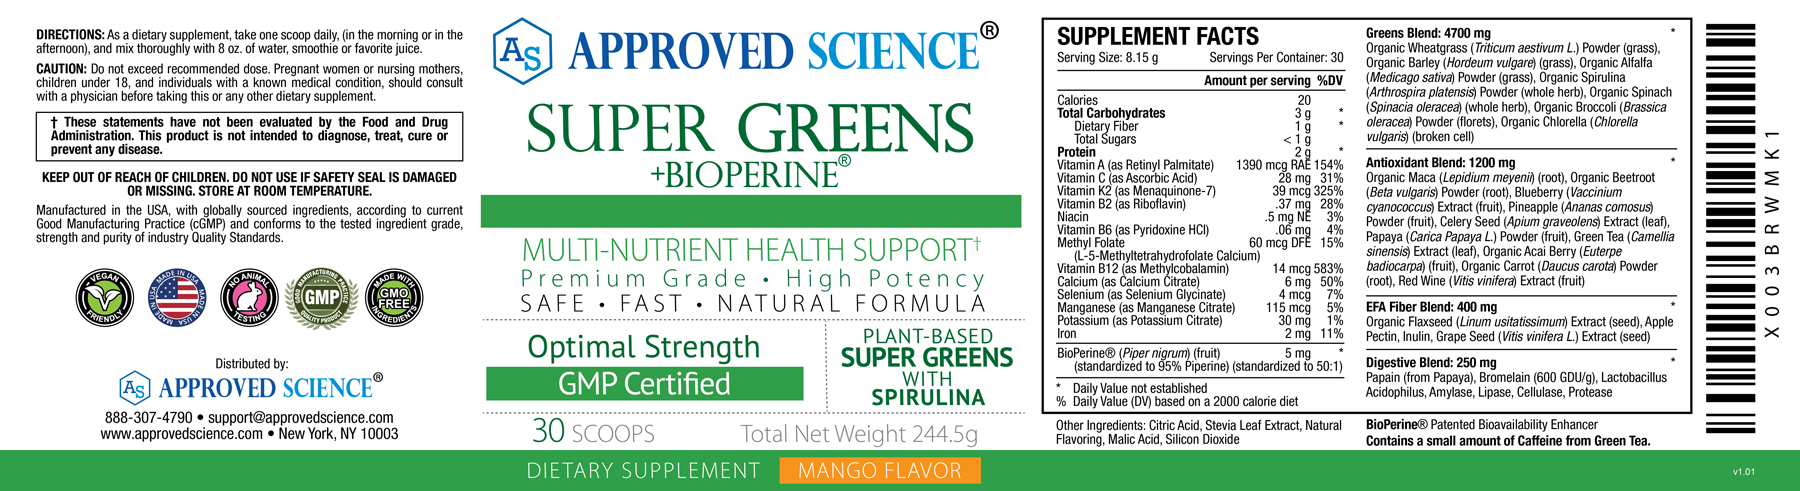 Approved Science® Super Greens Supplement Facts